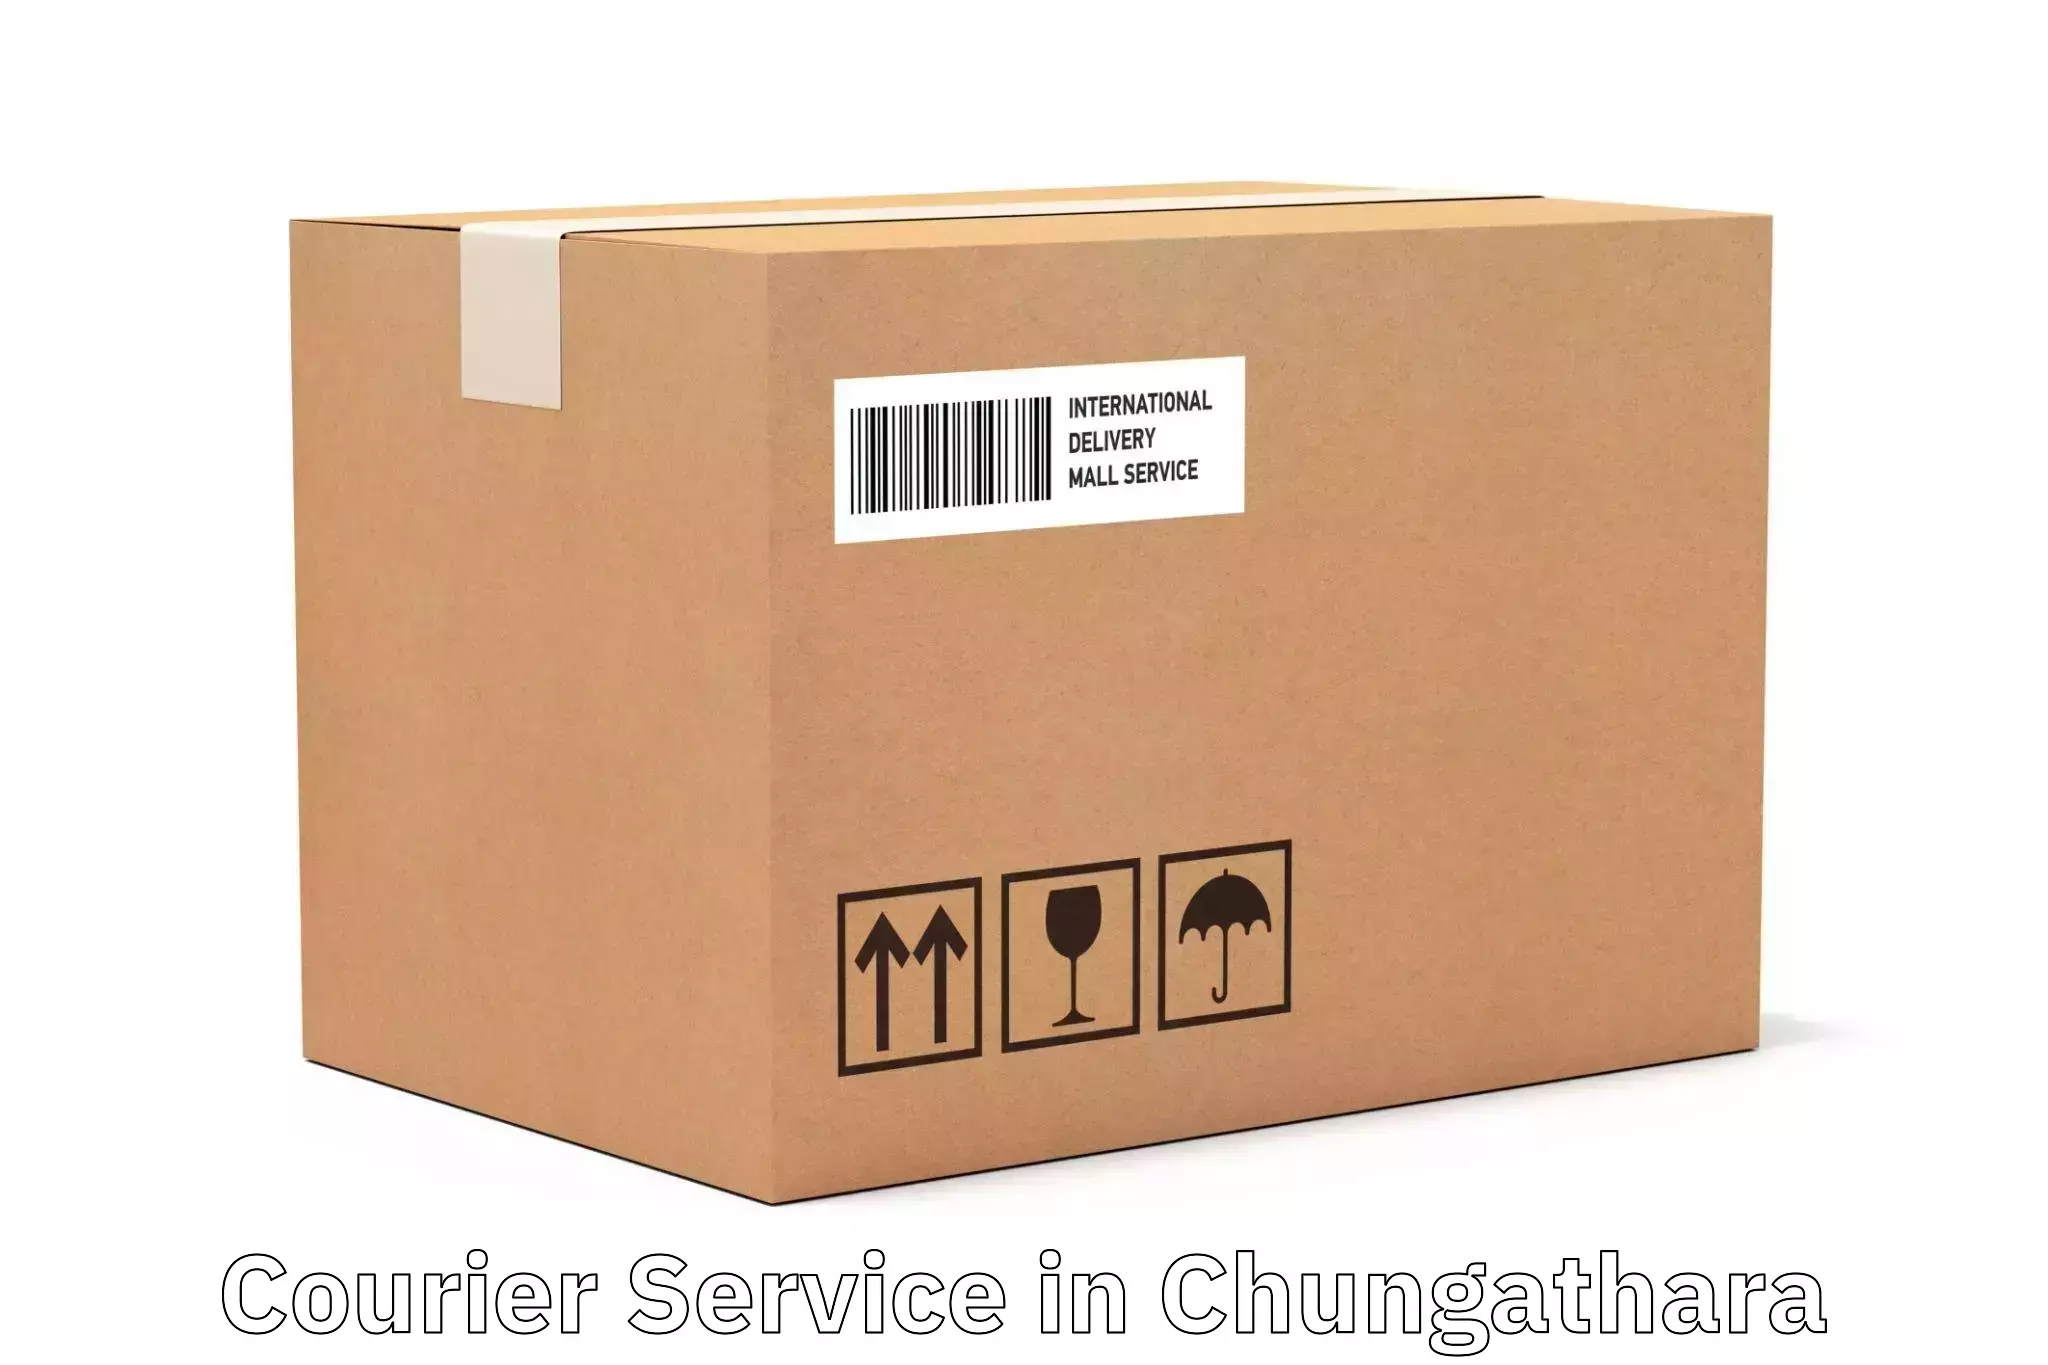 Parcel handling and care in Chungathara